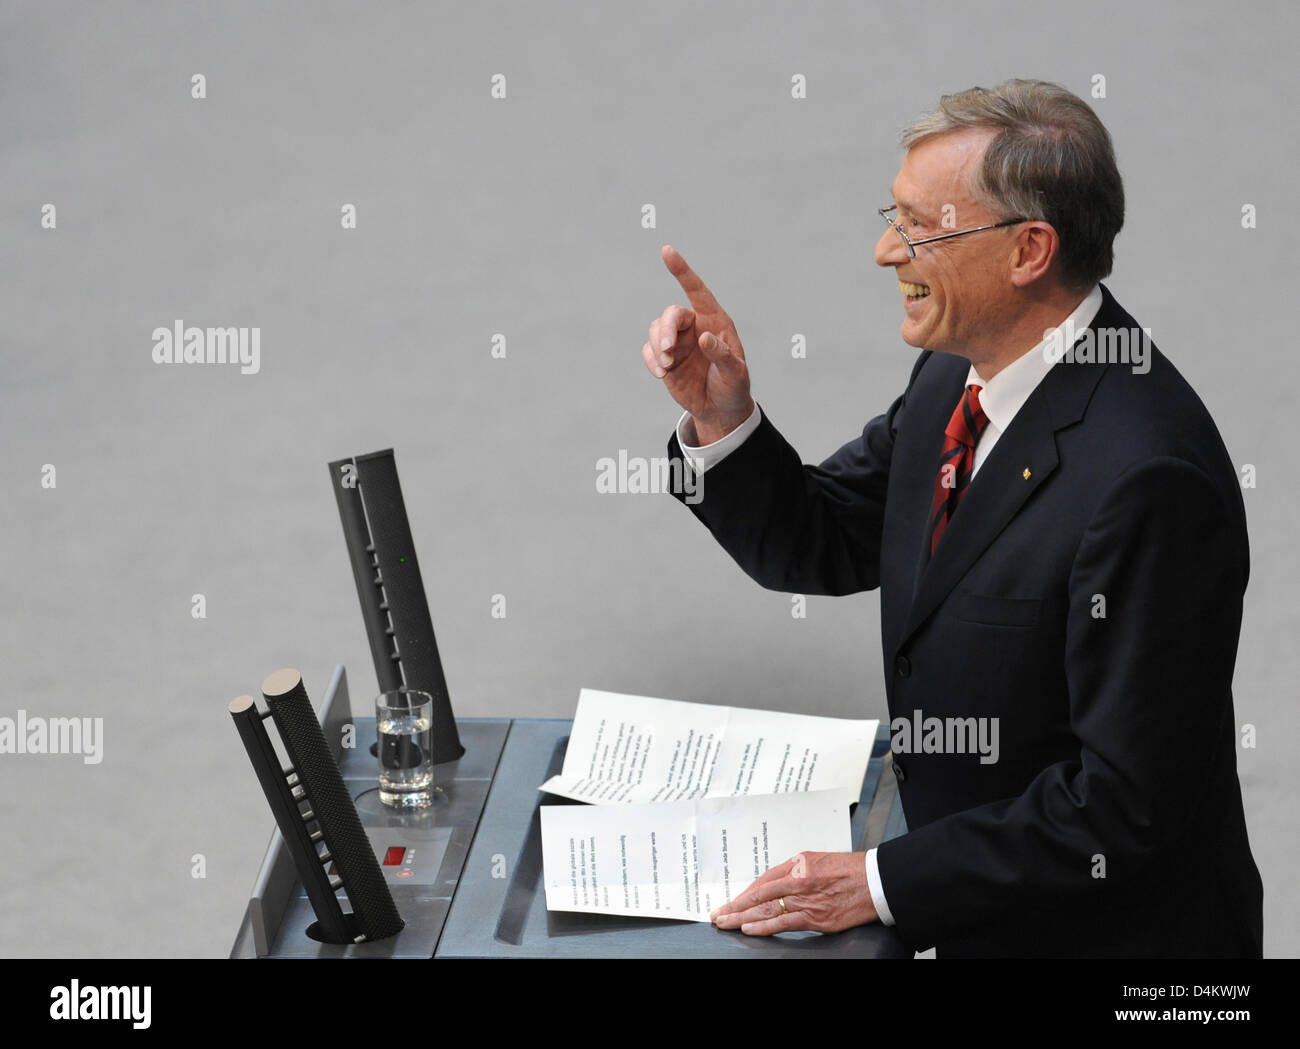 Federal German President Horst Koehler speaks after his reelection at the 13th Federal Convention in the plenar hall of the Reichstag building in Berlin, Germany, 23 May 2009. Koehler won the election with 613 votes, the minimum number of necessary votes. Photo: Peer Grimm Stock Photo